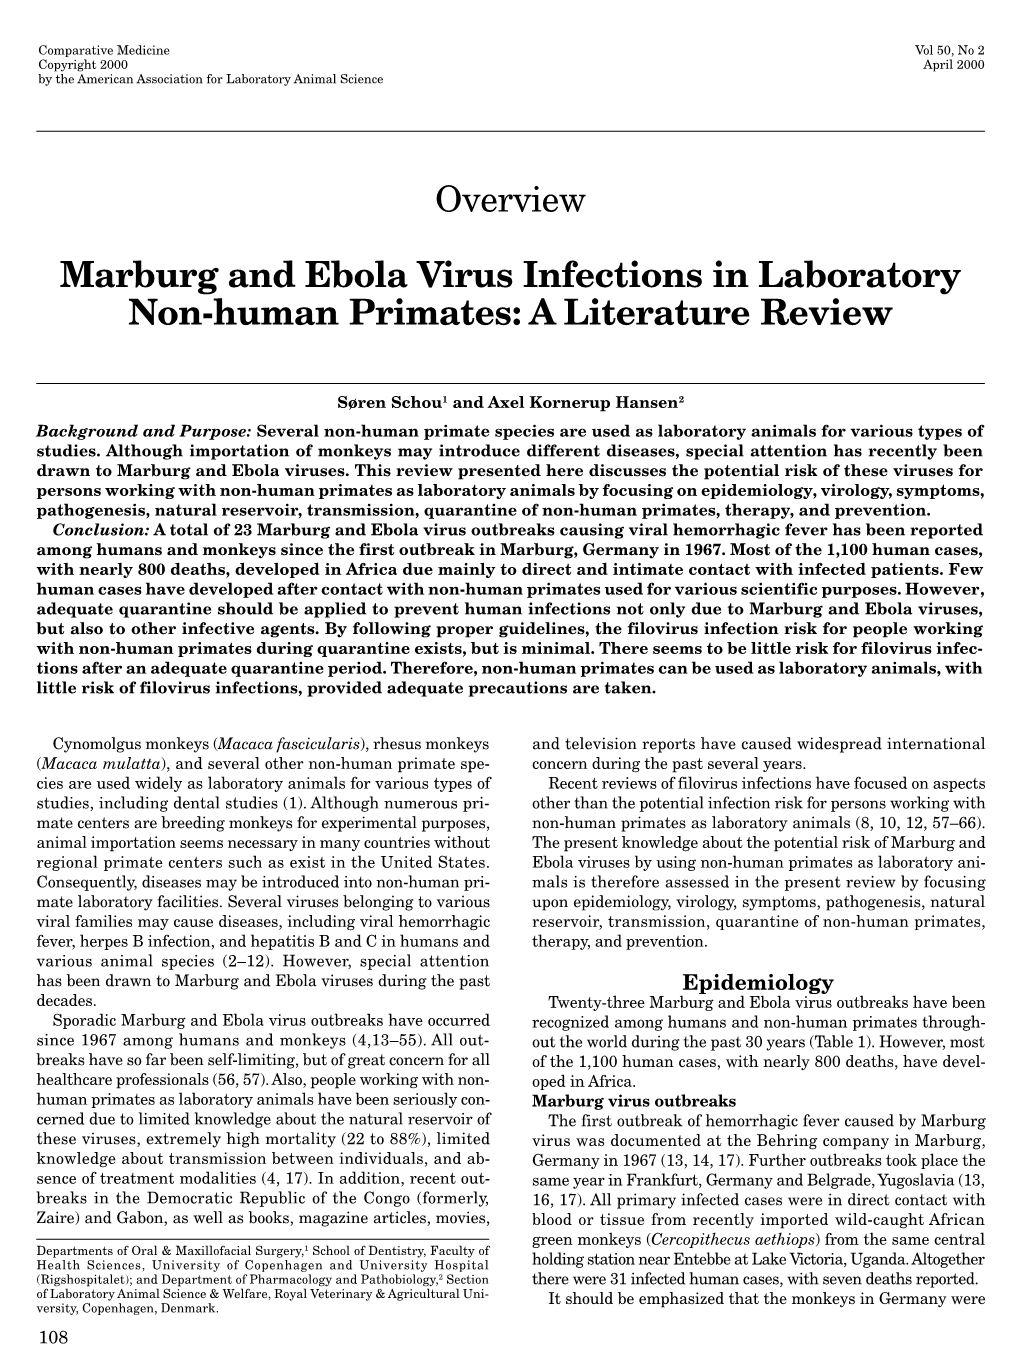 Marburg and Ebola Virus Infections in Laboratory Non-Human Primates: a Literature Review